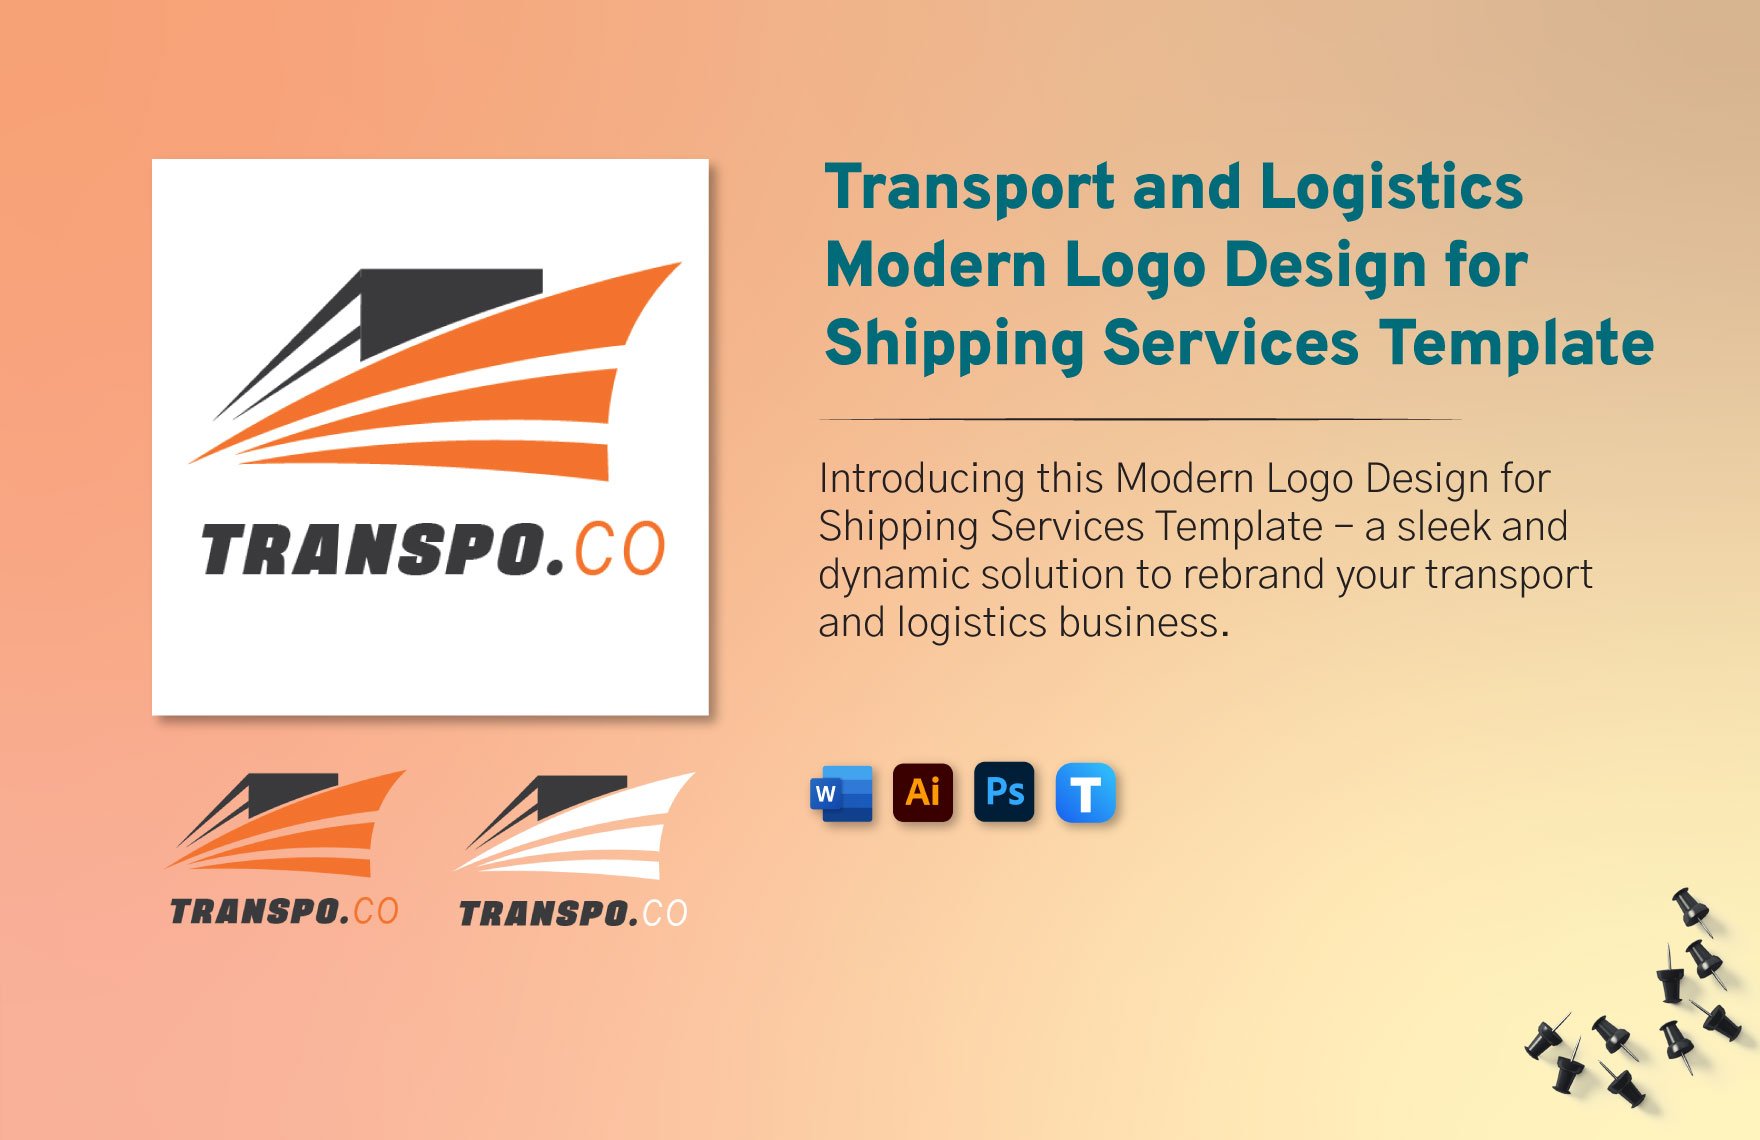 Transport and Logistics Modern Logo Design for Shipping Services Template